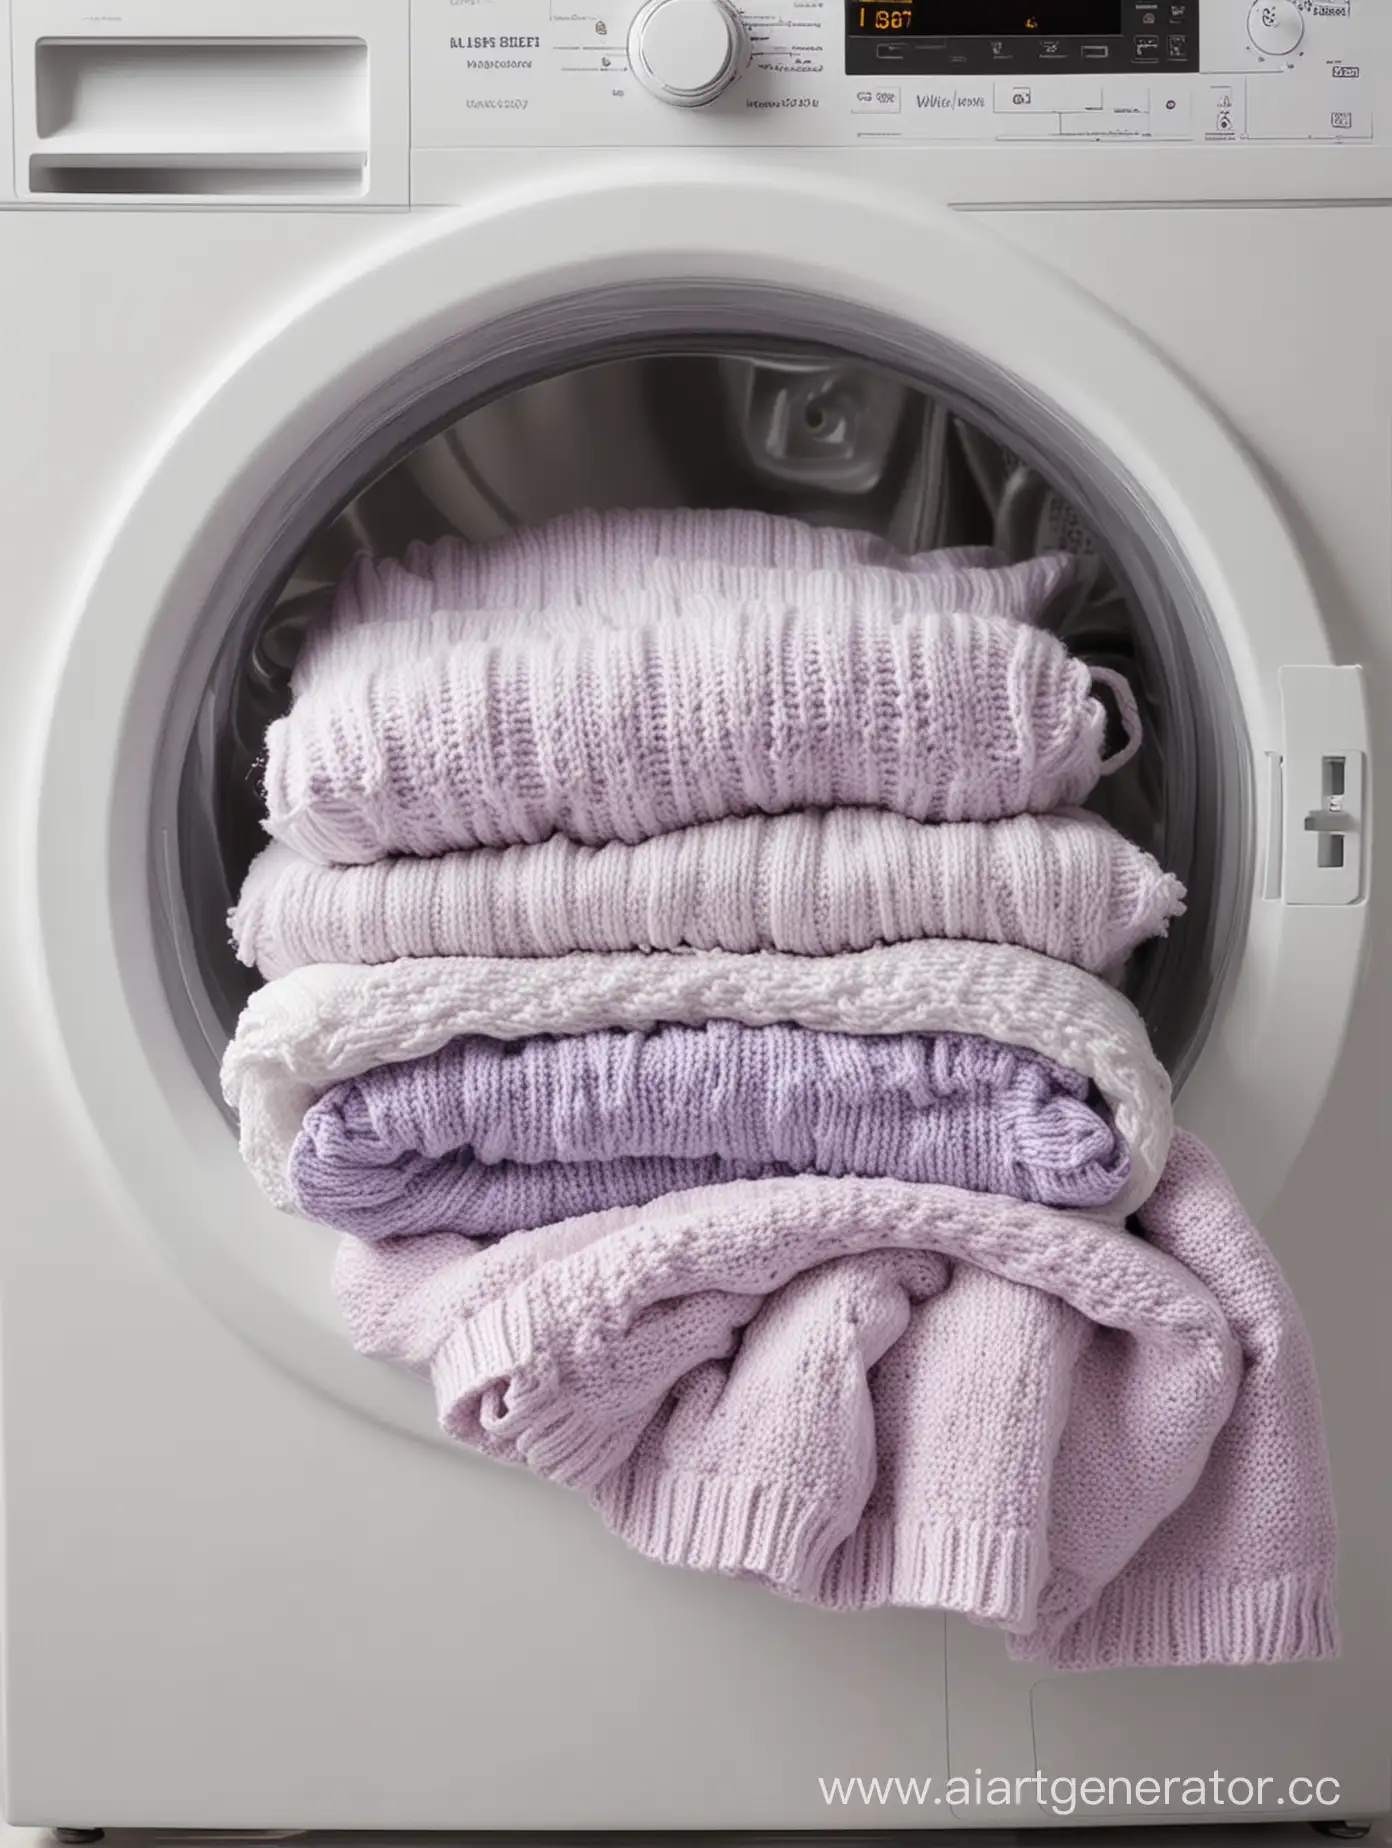 soft lavender and white knitted items lie folded on a washing machine